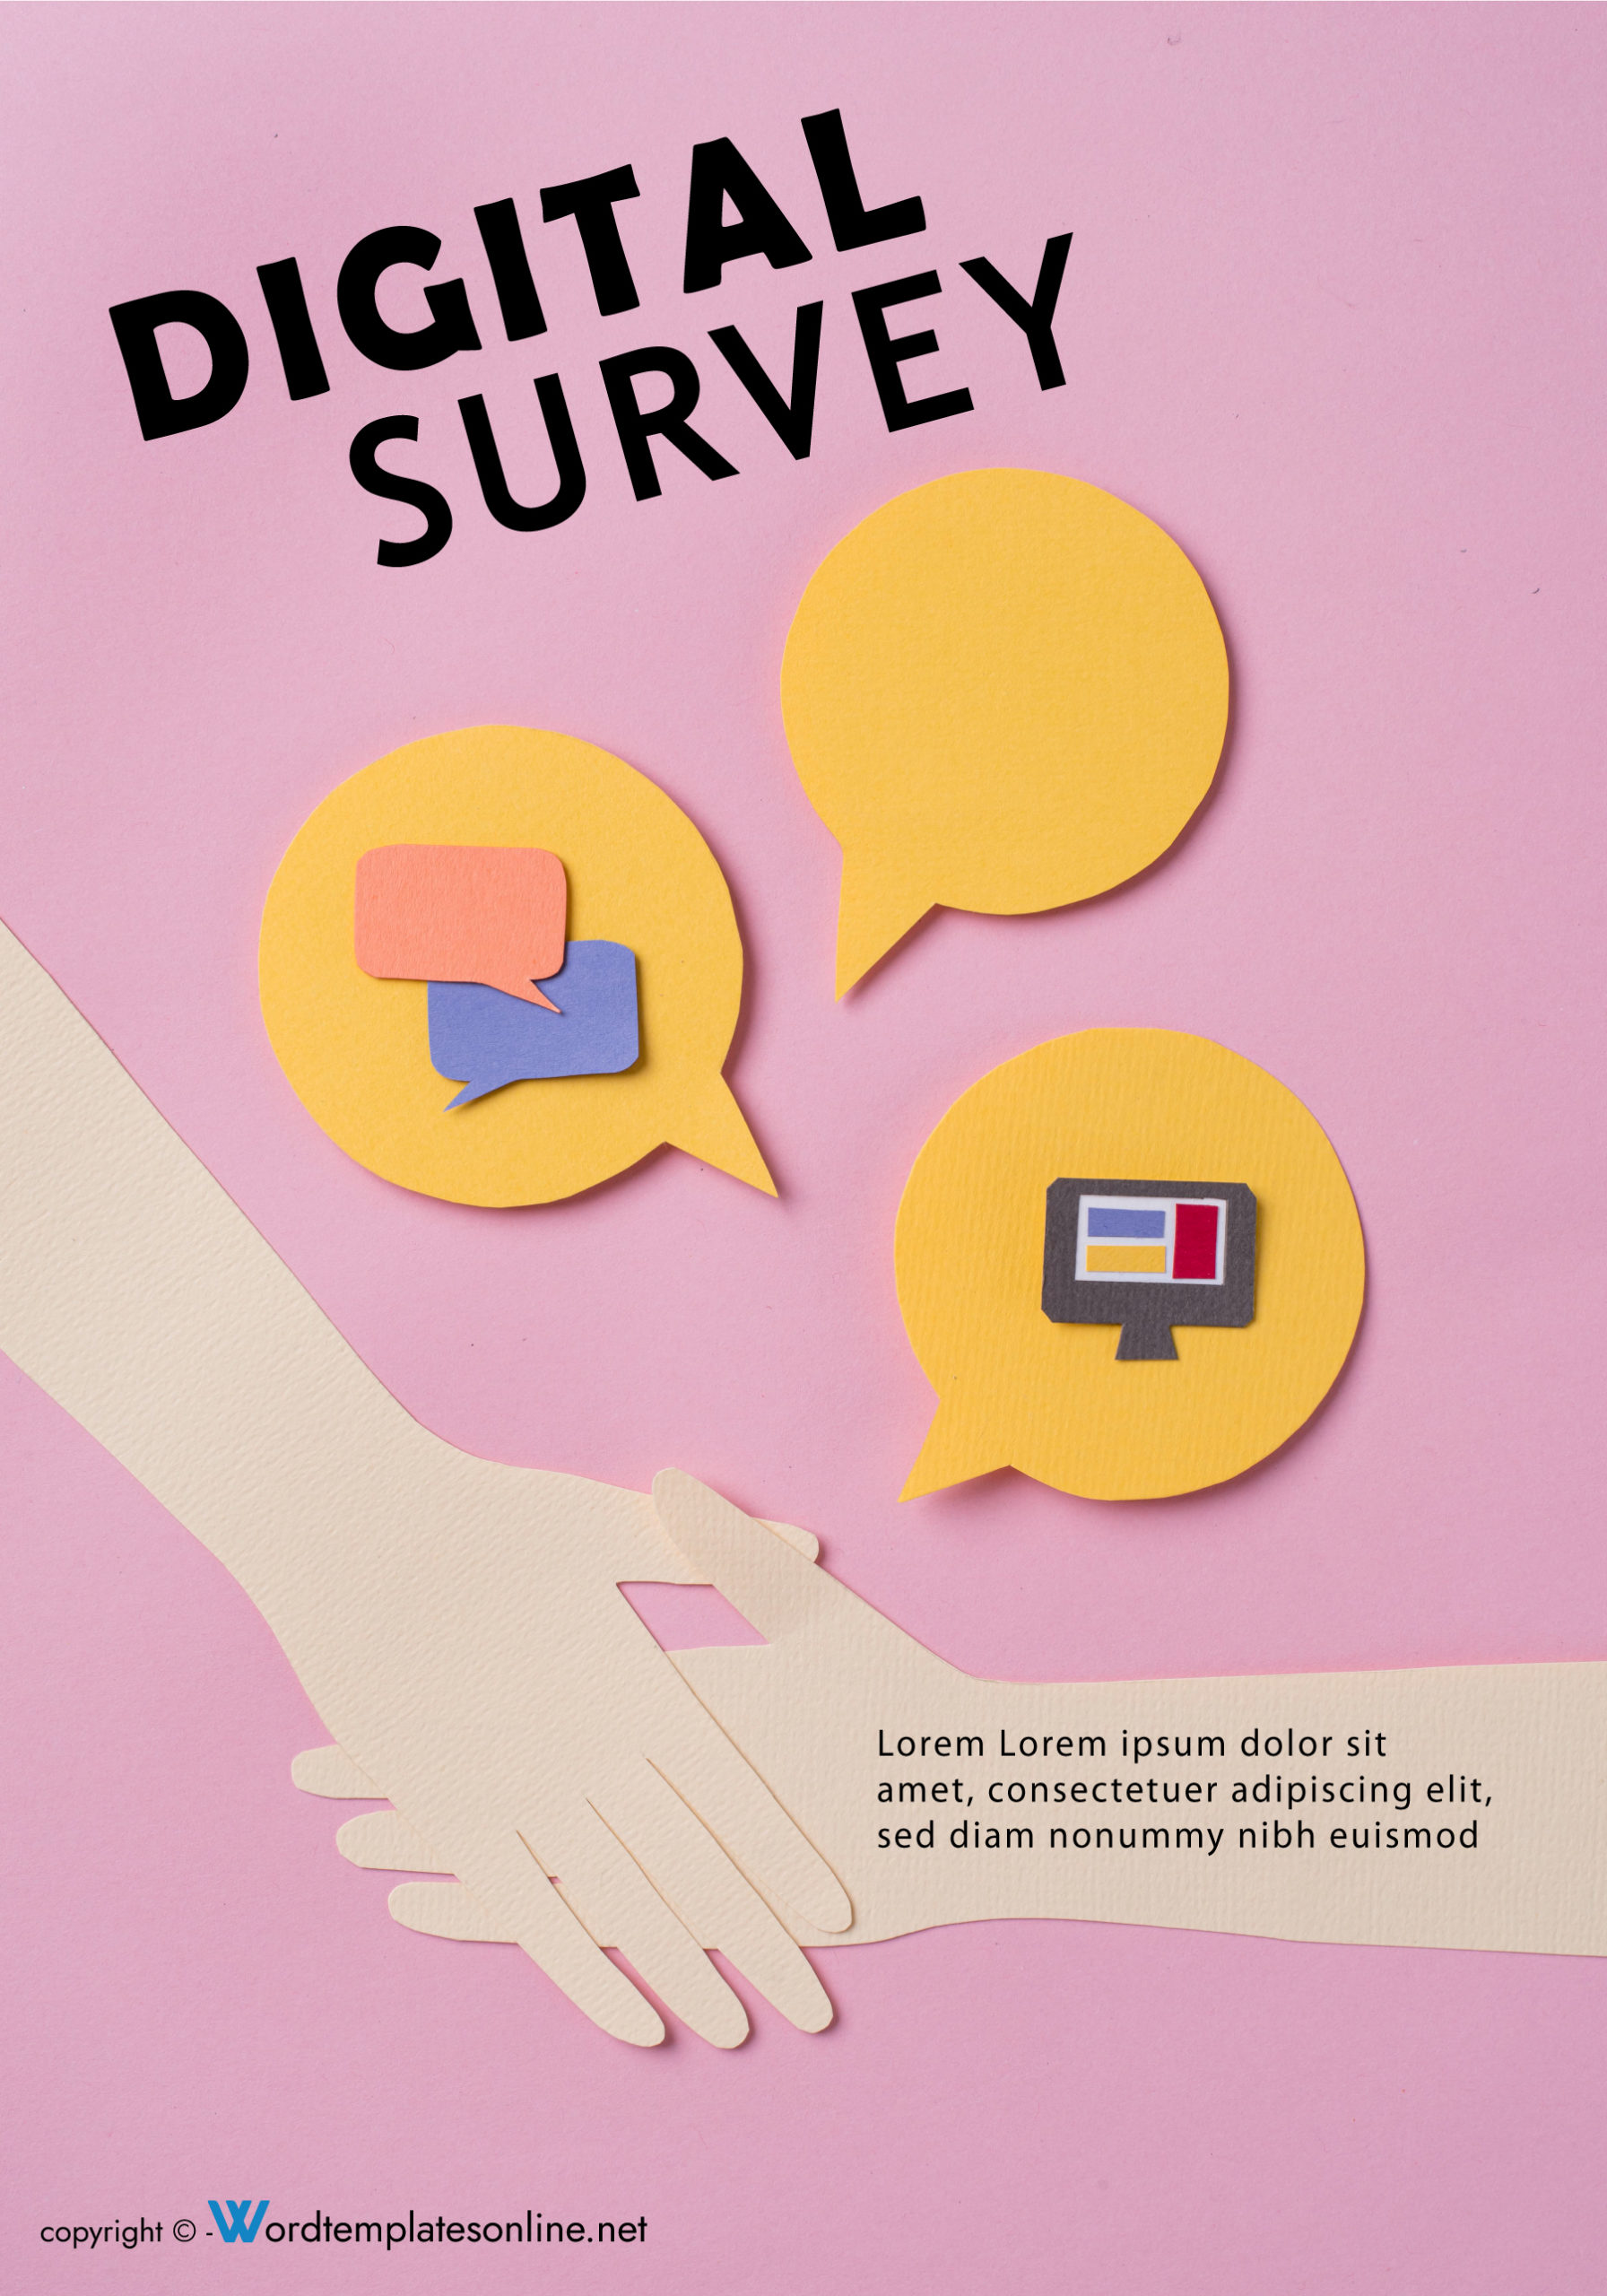 Digital Survey Cover Page Template - Editable and Print-Ready